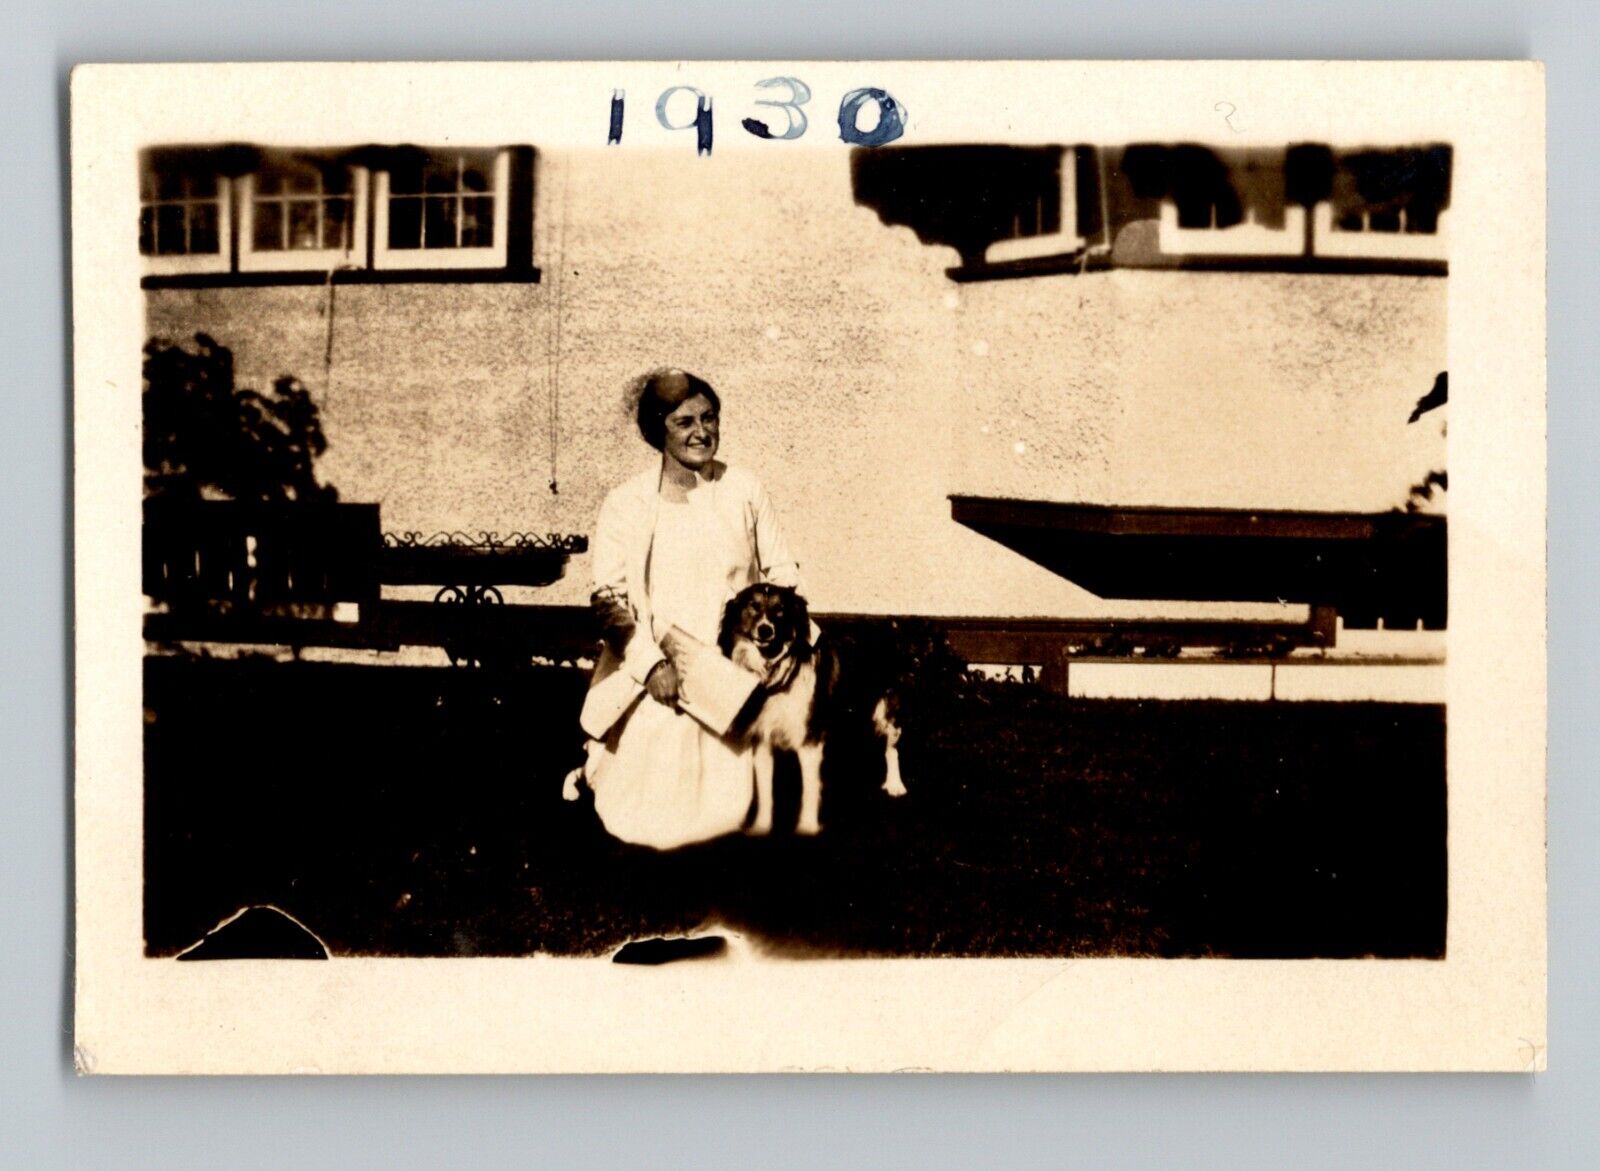 Charming 1930s Vintage Snapshot with Woman and Dog - 1 7/8x2 3/4